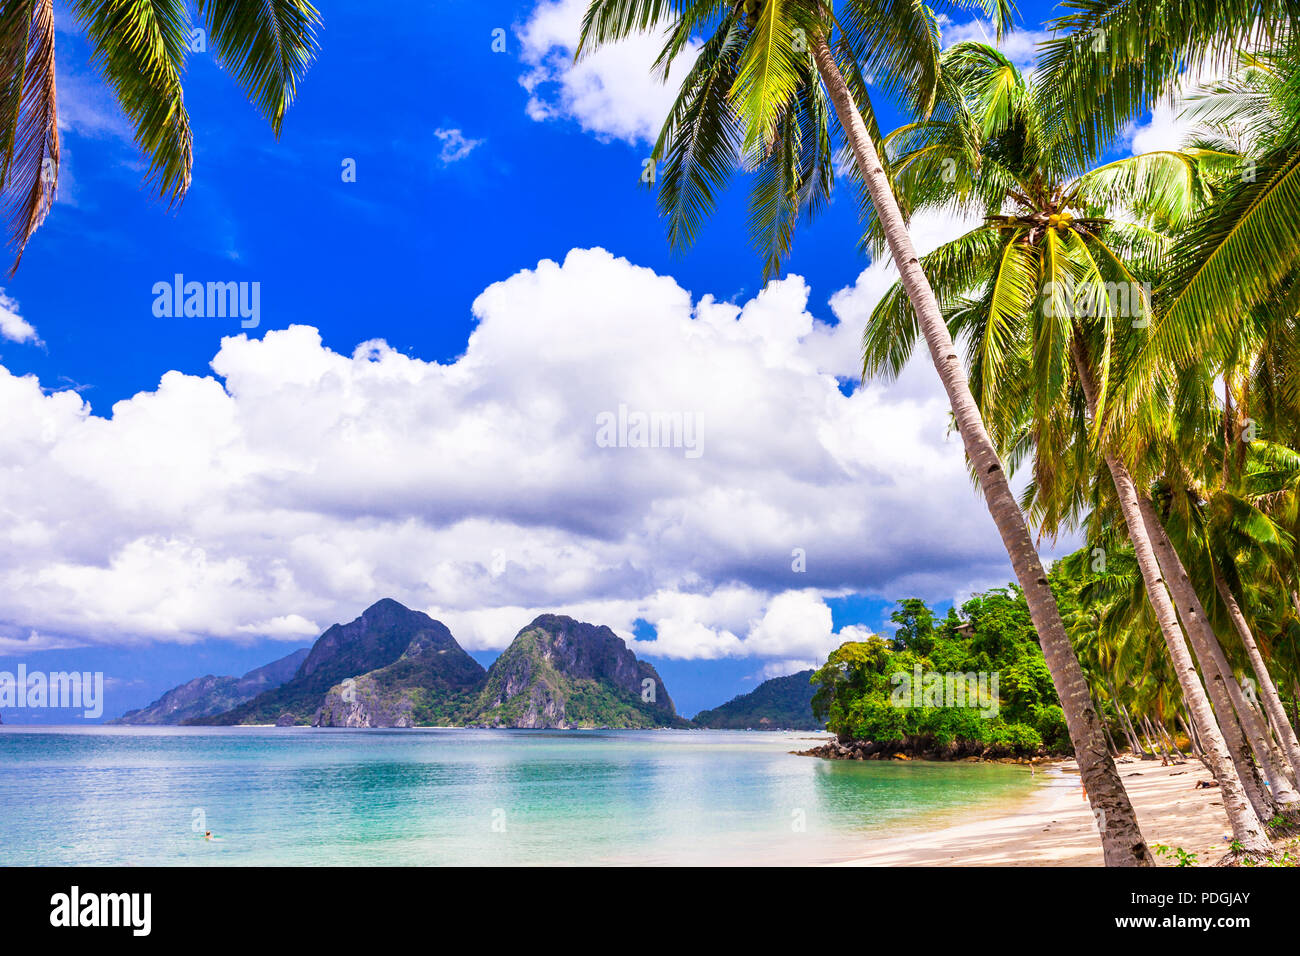 Beautiful beach of Palawan,view with palm trees,sea and mountains,Philippines. Stock Photo